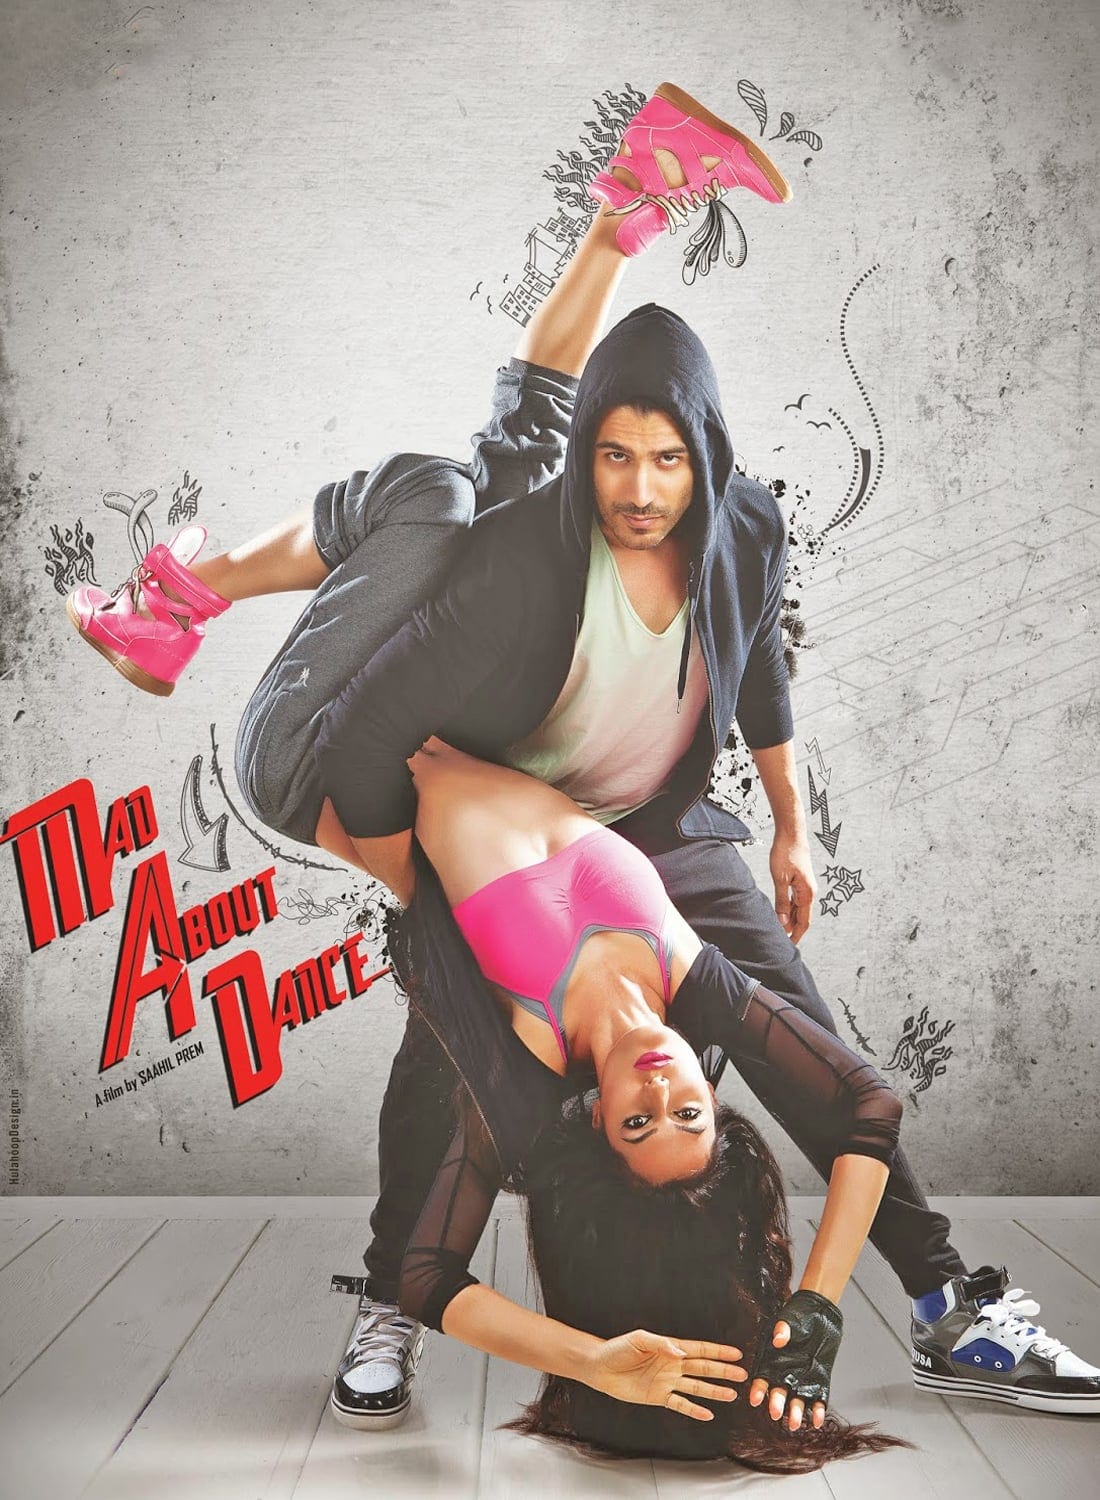 Poster for the movie "Mad About Dance"